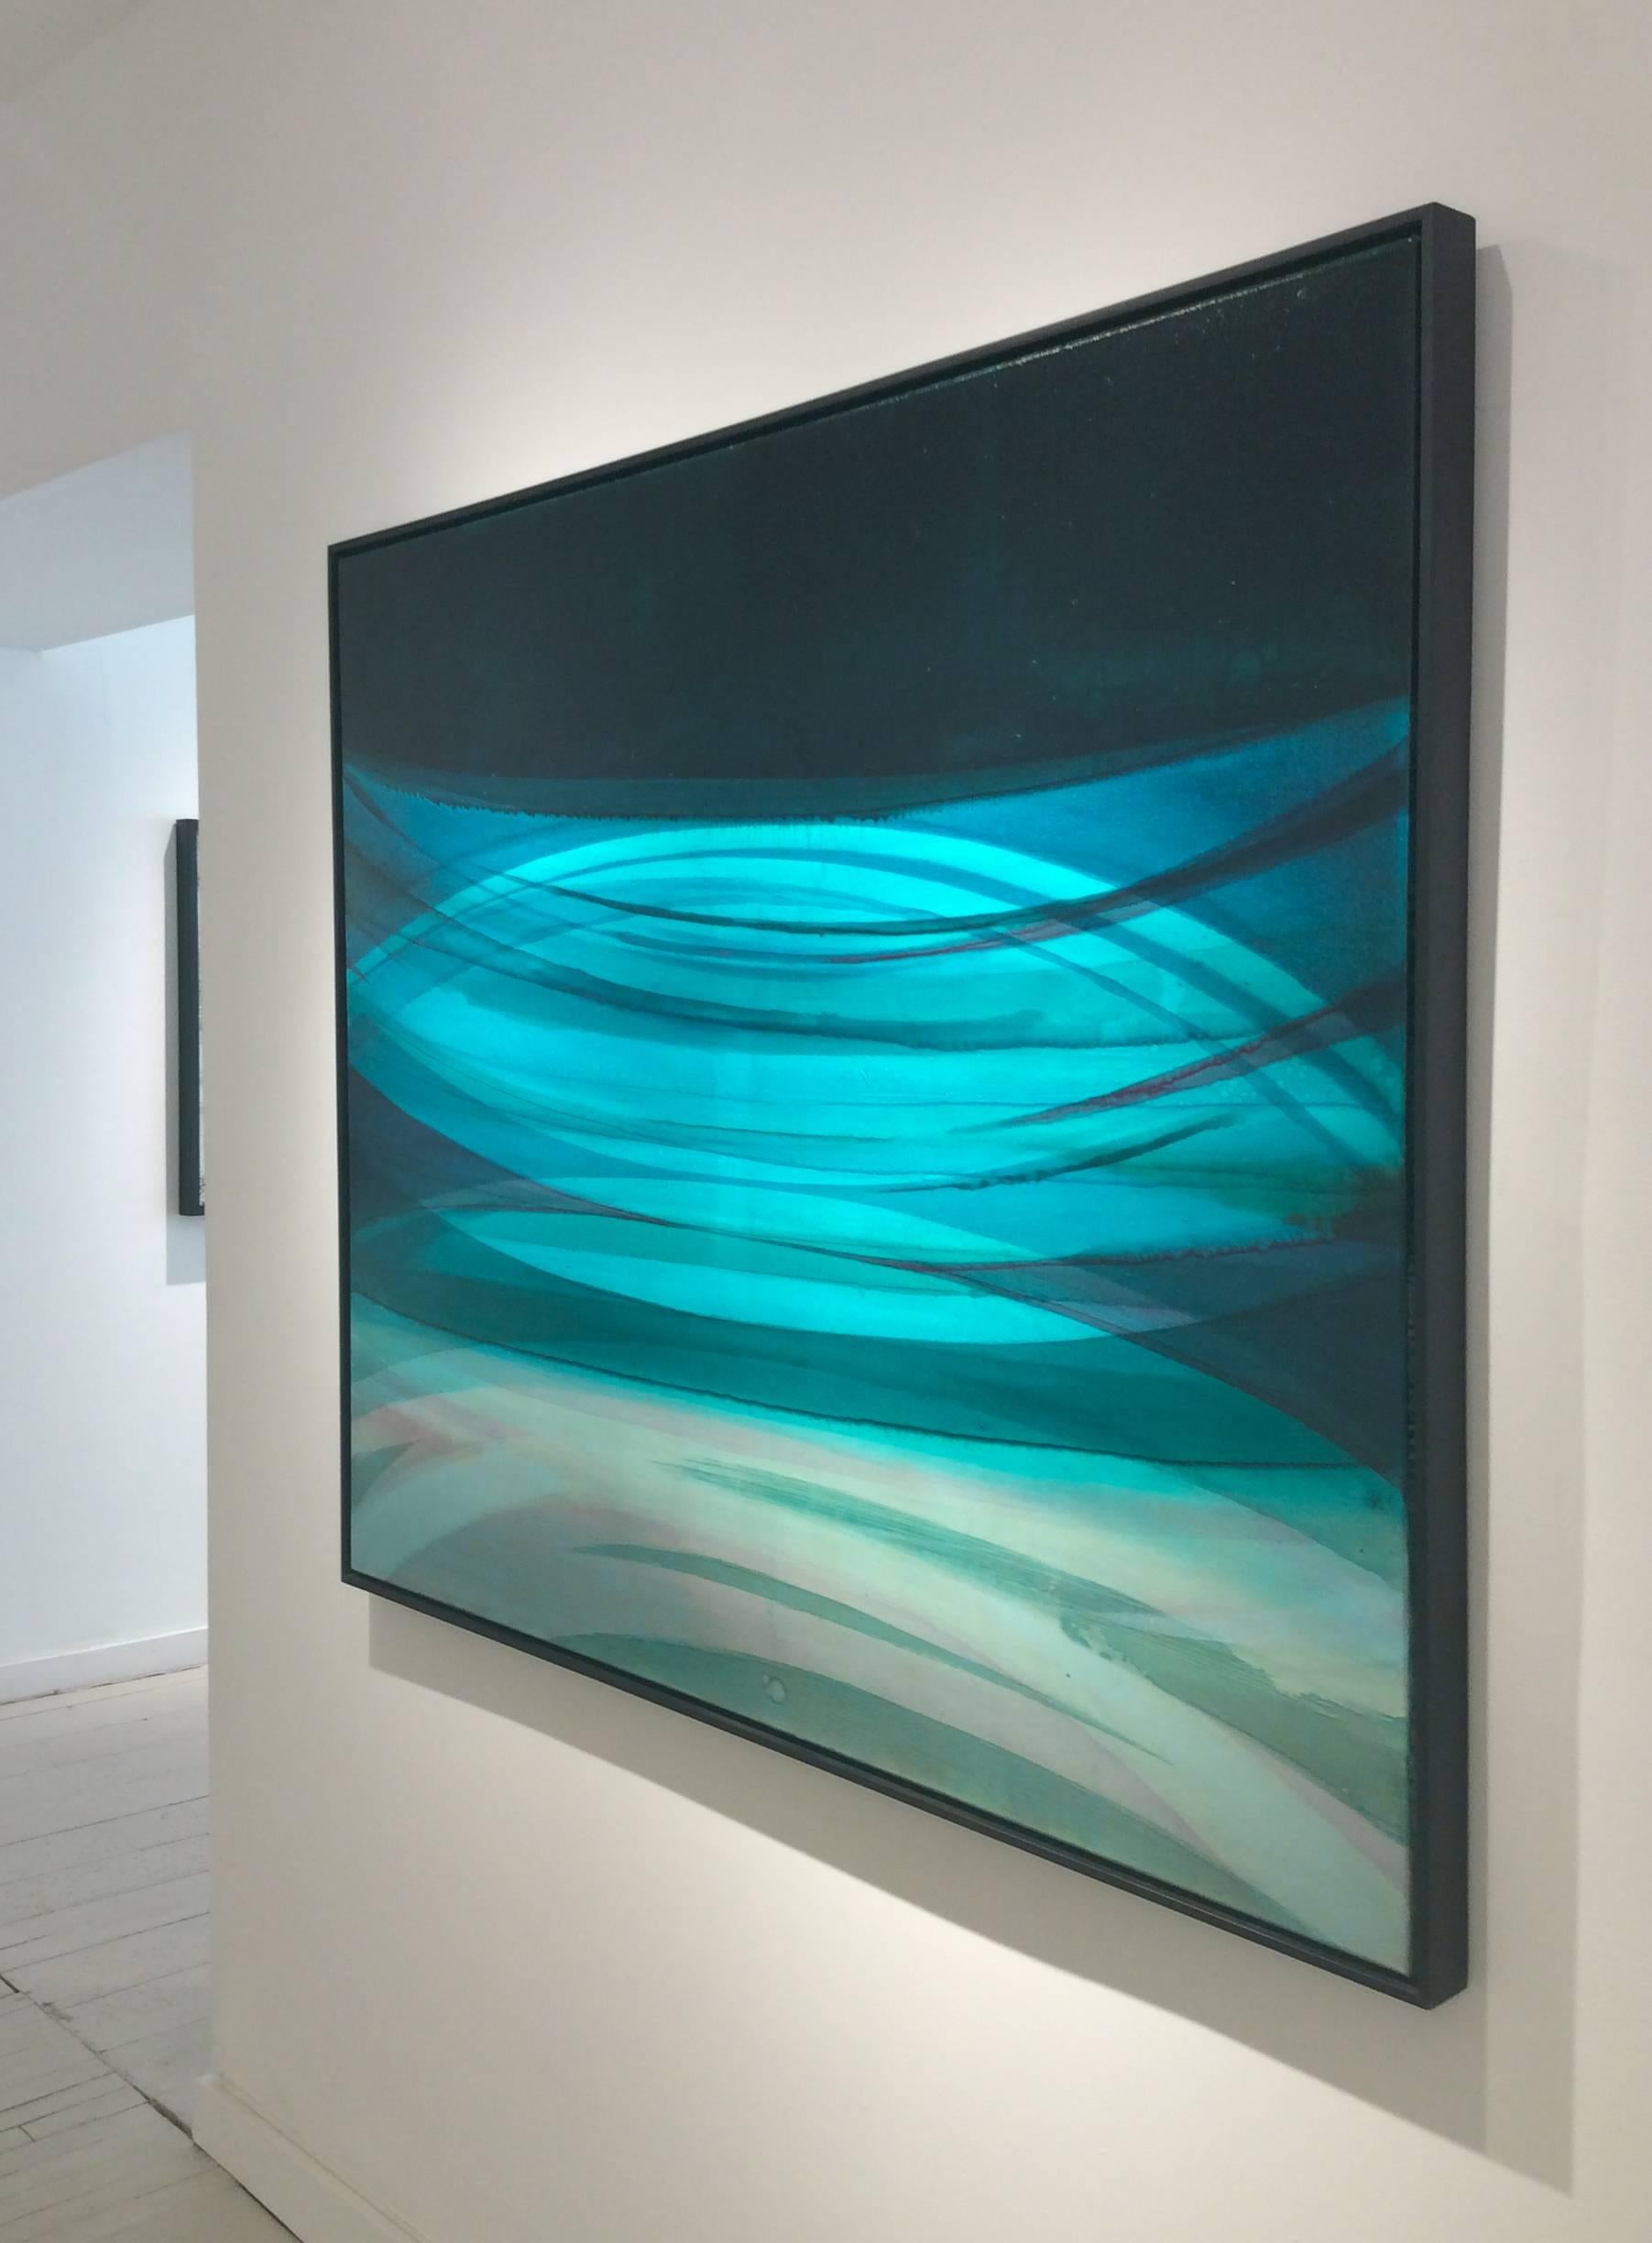 Horizontal minimalist abstract acrylic painting in color fields of aqua, deep blue and black. 
oil and alkyd on canvas in a Larson Juhl black wood recessed framed

Inspired by stones, stains from nature, erosion and artists such as Rothko and Sam